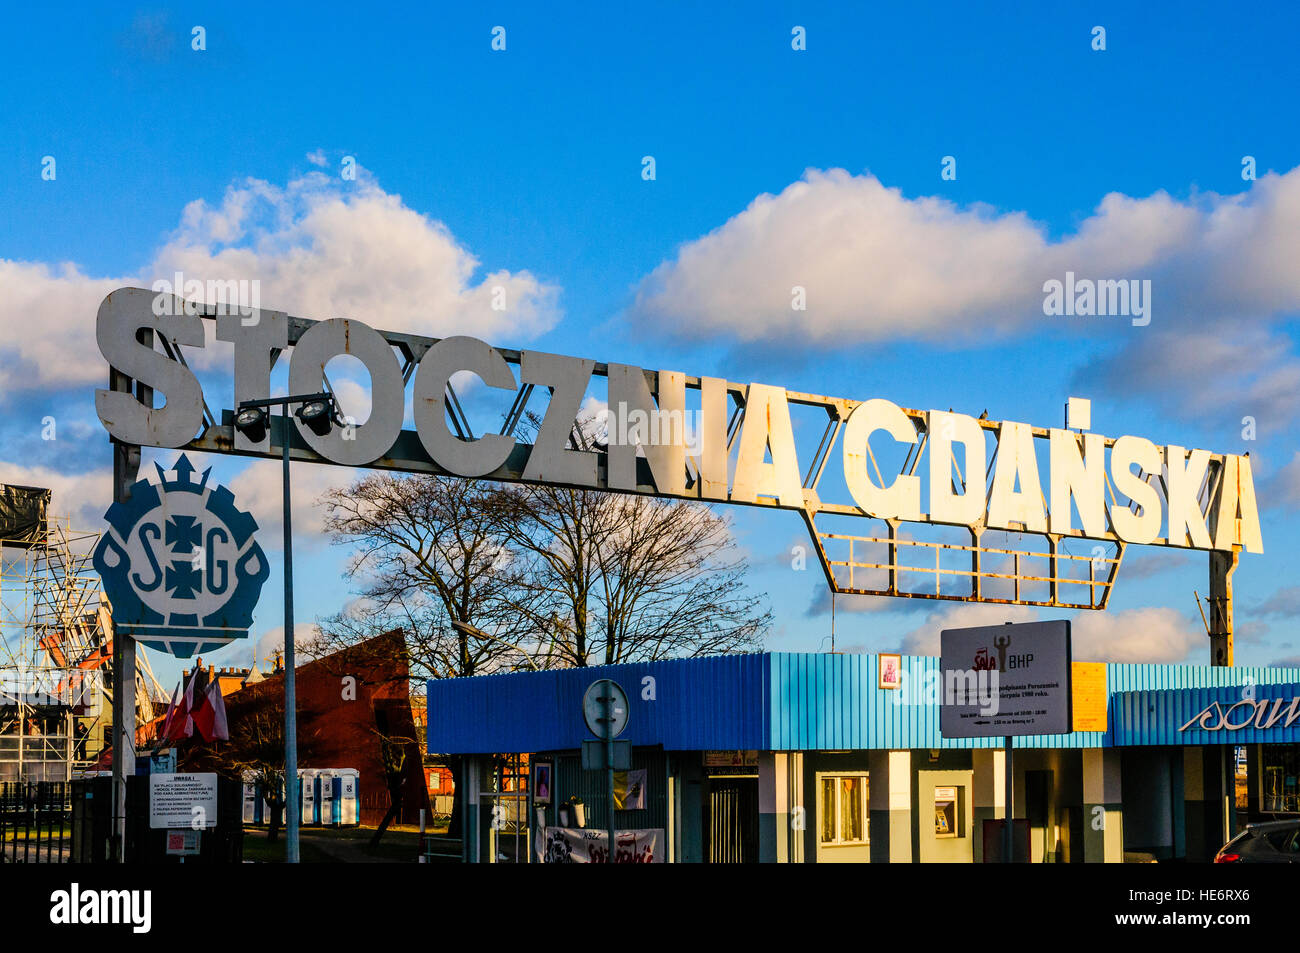 Gates of the Lenin Shipyard, Gdansk, birthplace of the Solidarity movement. Stock Photo